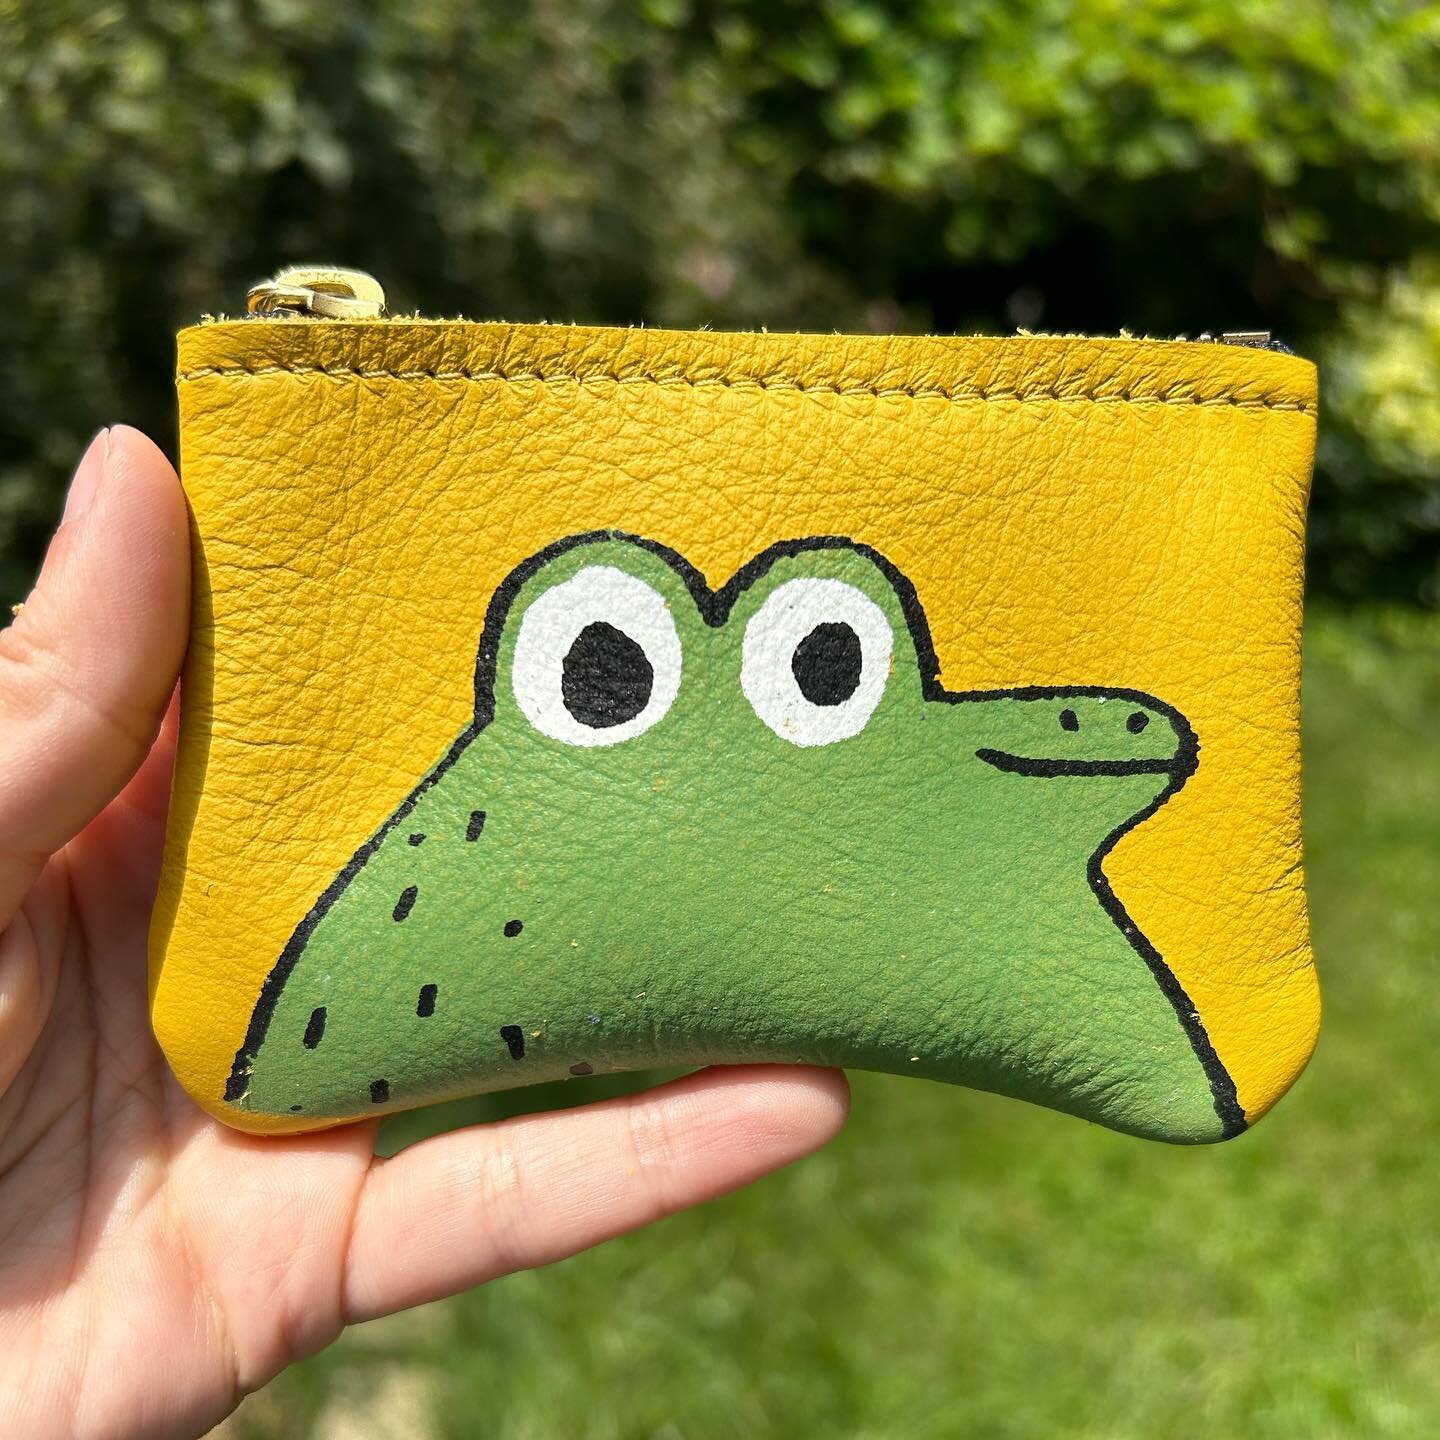 Everyone needs a frog pouch right?!